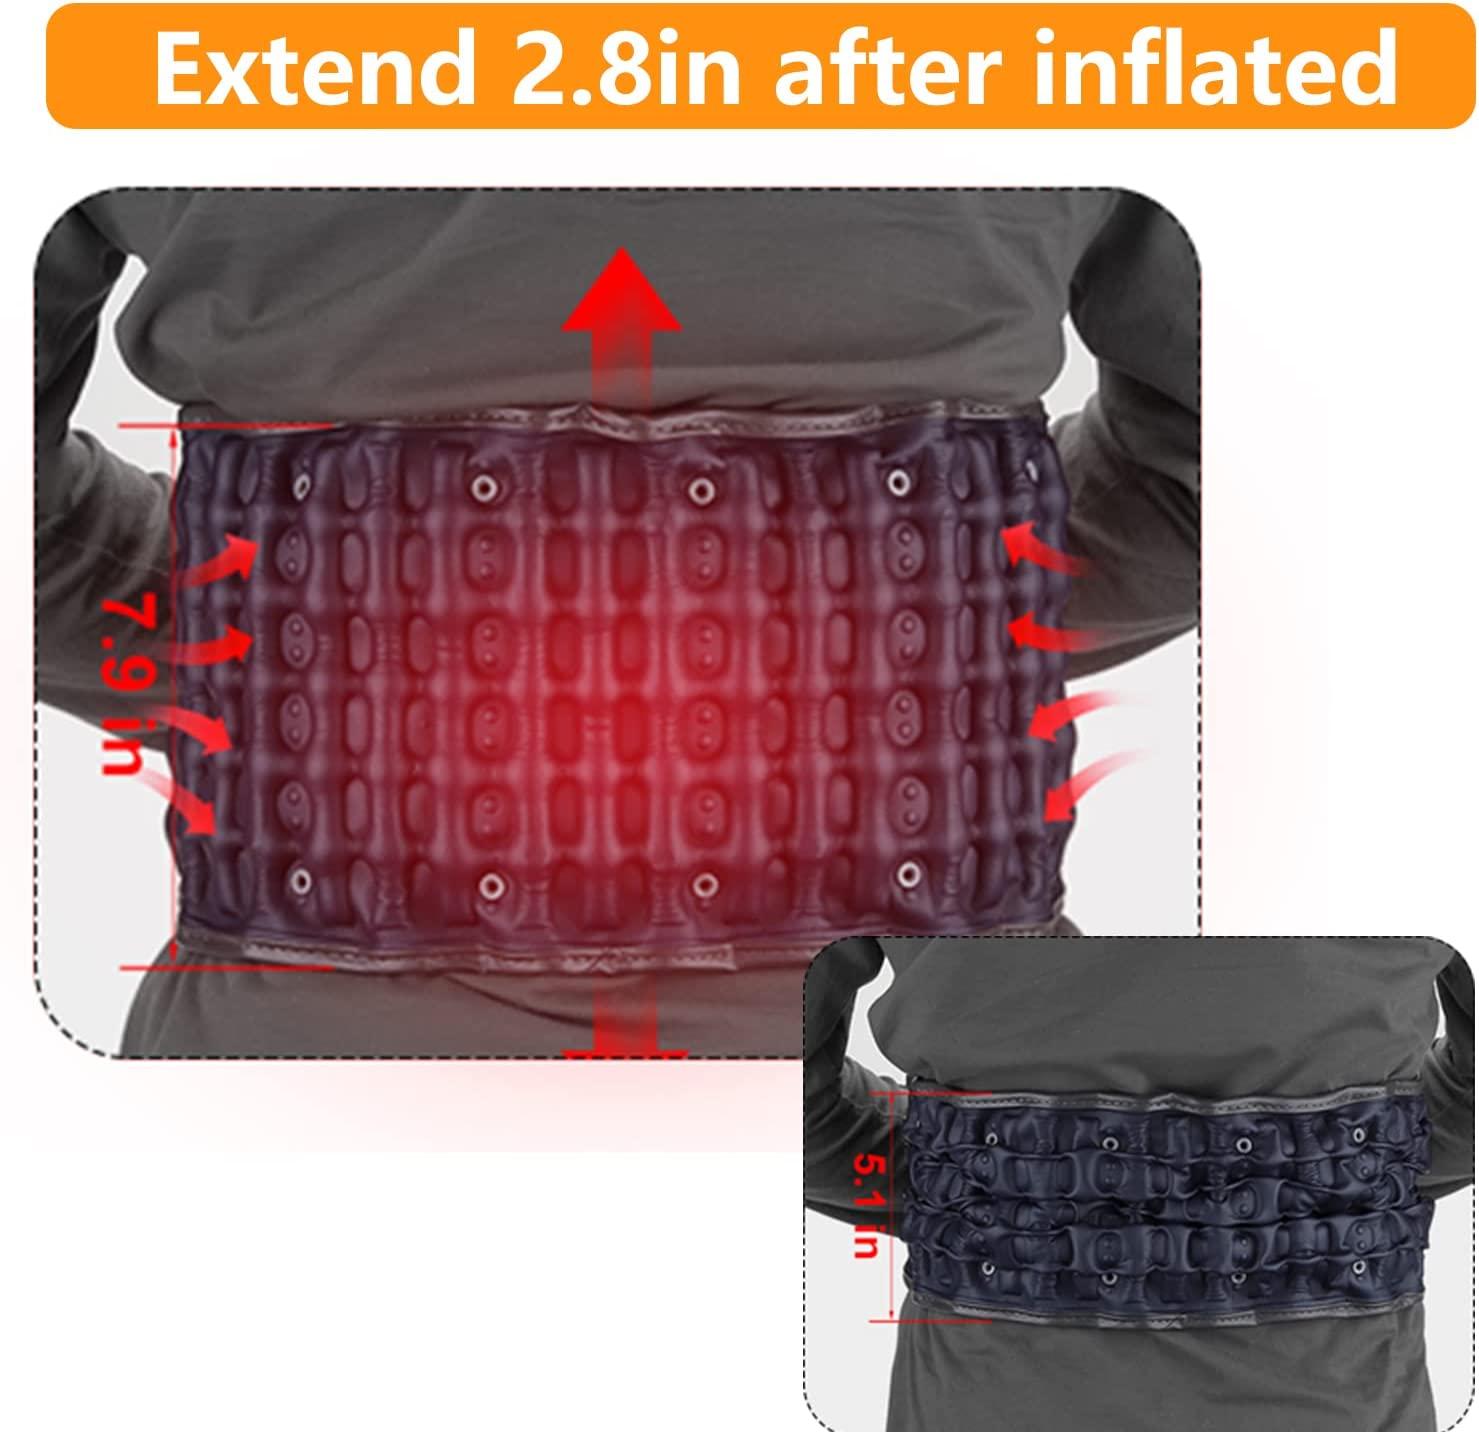 Inflatable Back Support Belt with Heating & Vibration for Instant Back Pain  Relief - HONGJING Spinal Decompression Back Brace with Rechargeable  Battery, One Size Fits 29-49 Waist Blue